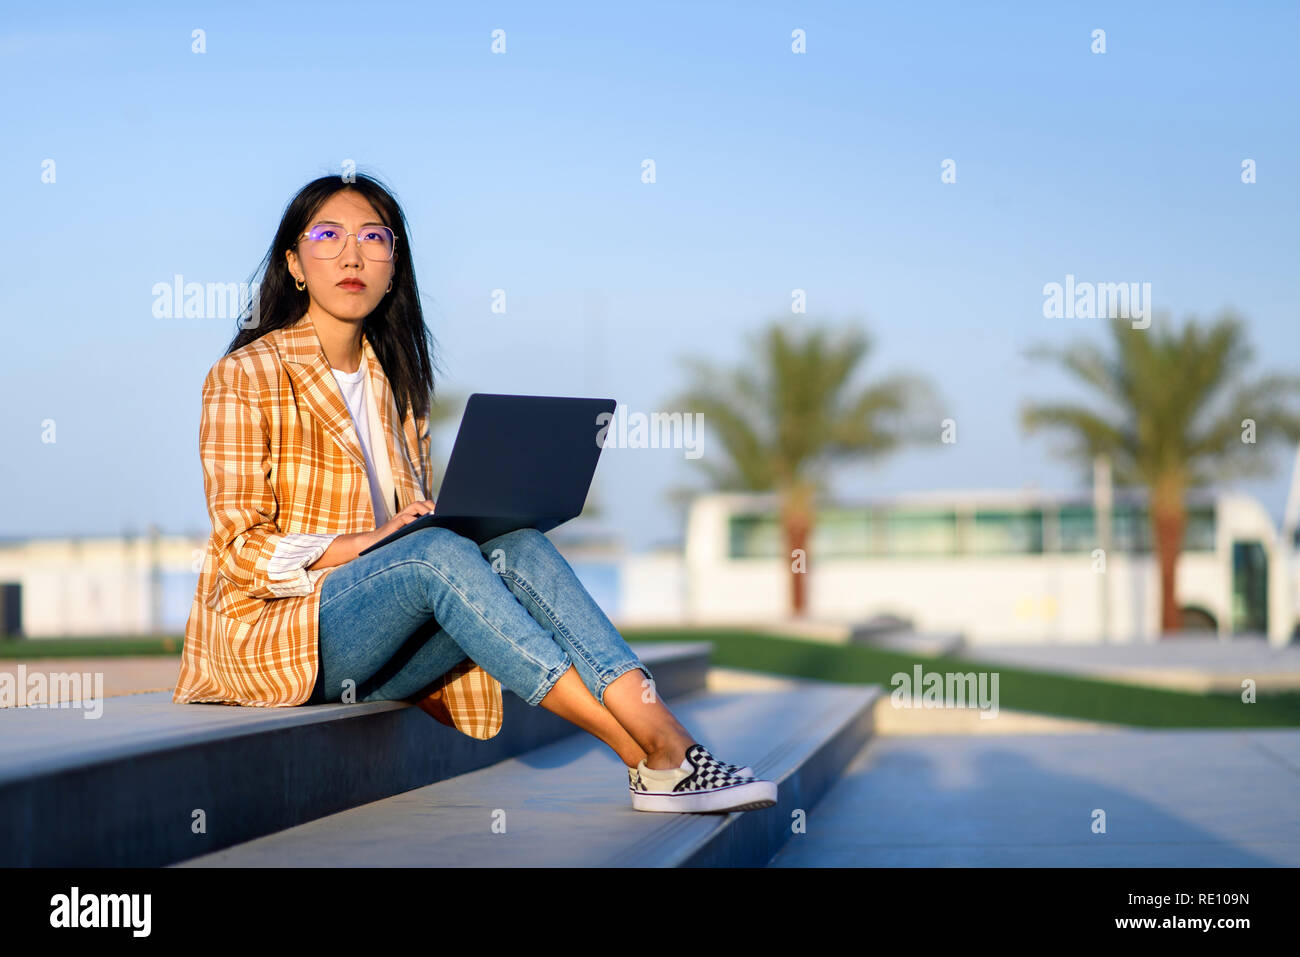 Fashionable Asian girl working on laptop outdoors Stock Photo